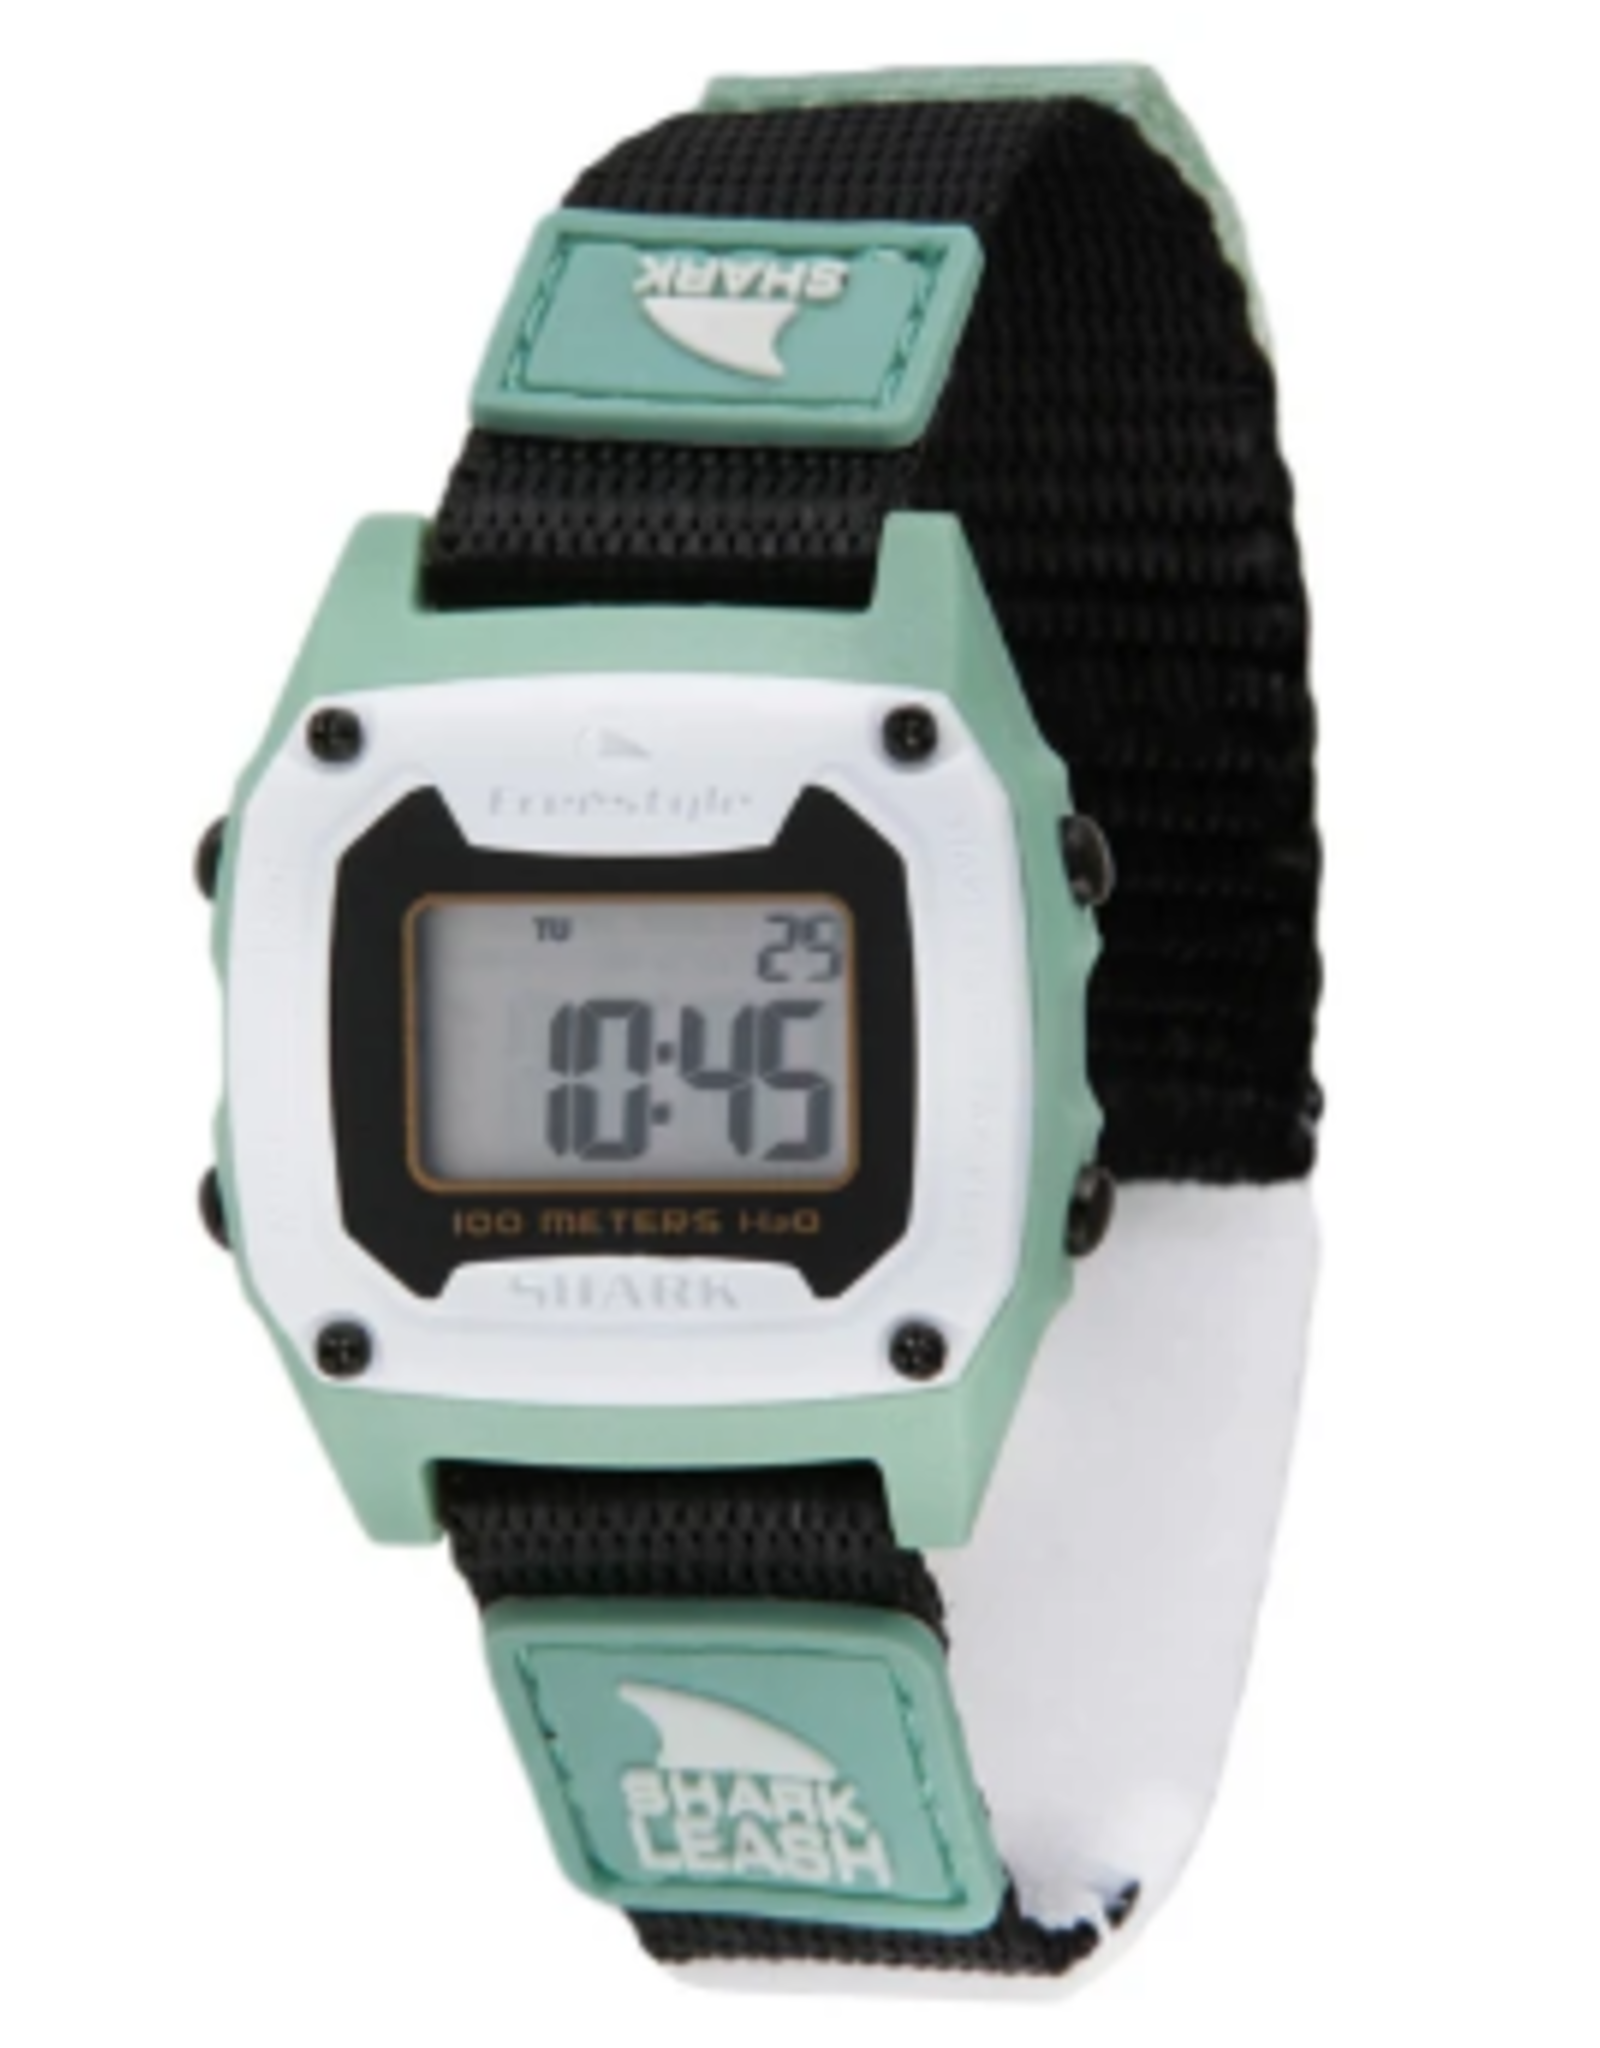 FREESTYLE FREESTYLE FREESTYLE SHARK CLASSIC CLIP PRICKLY PEAR GREEN WATCH